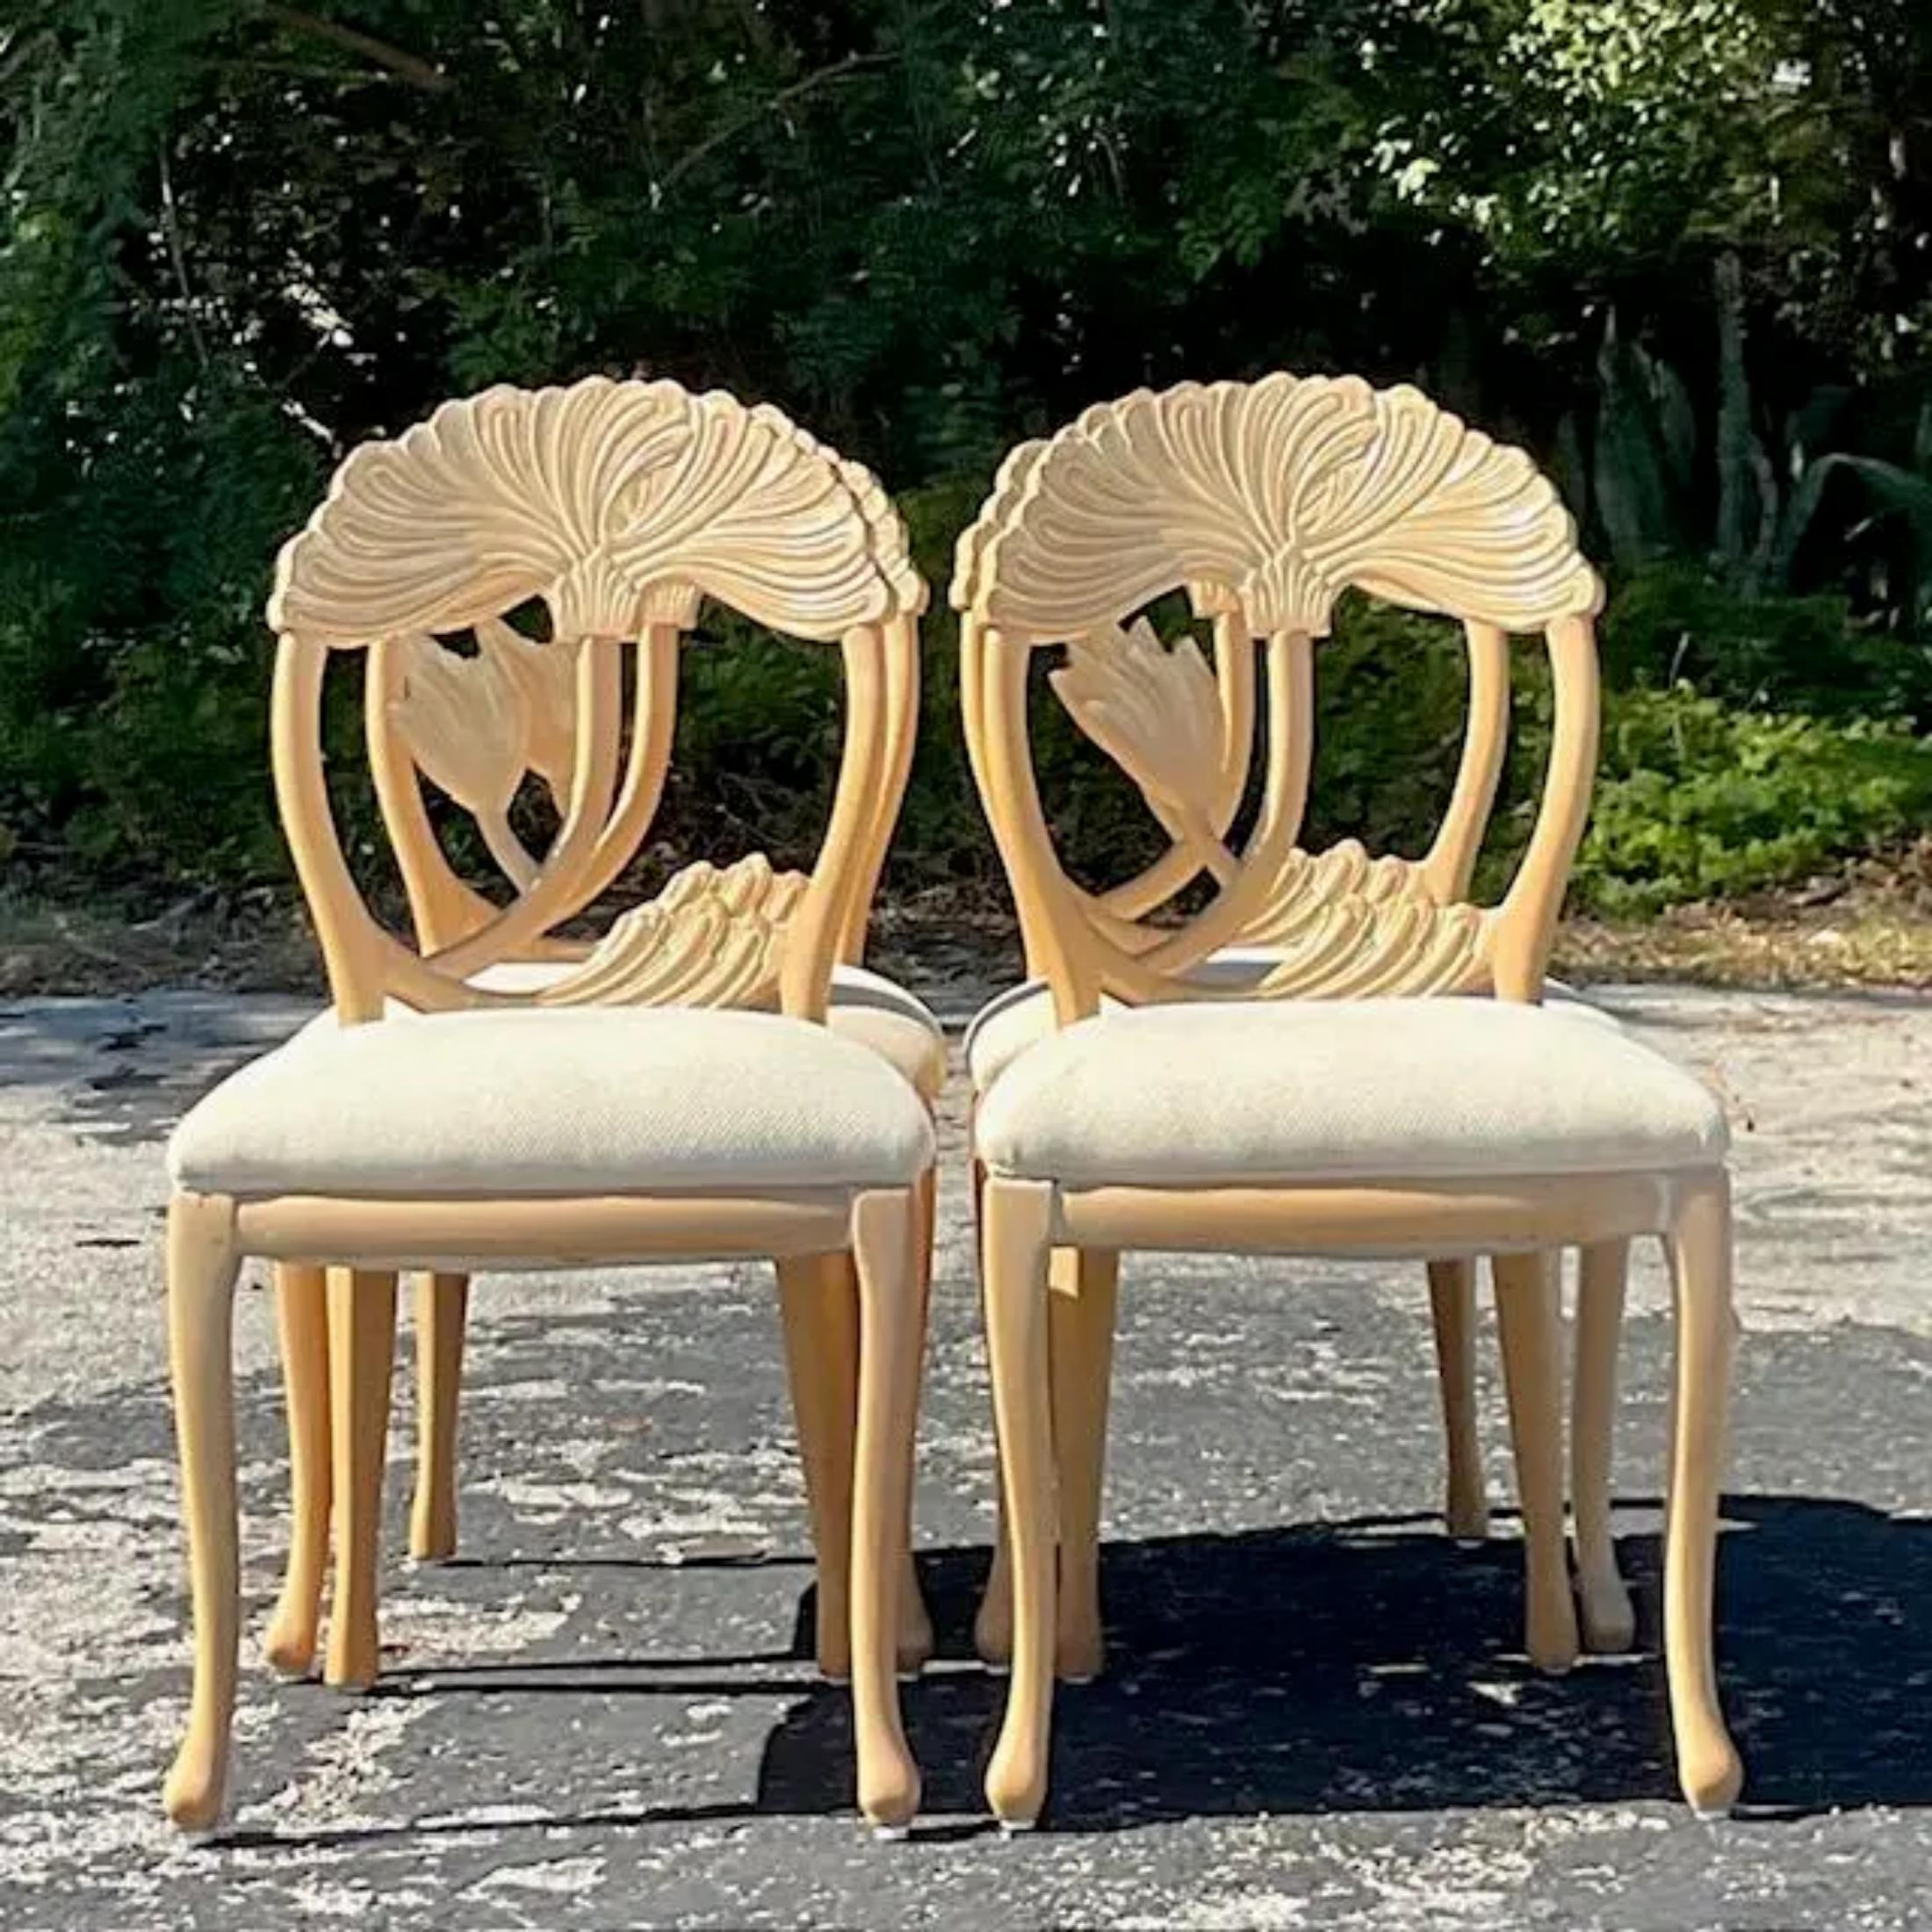 A fabulous set of four Coastal wood dining chairs. A chic hand carved Lotus blossom in a pale Ash wood. Acquired from a Palm Beach estate.